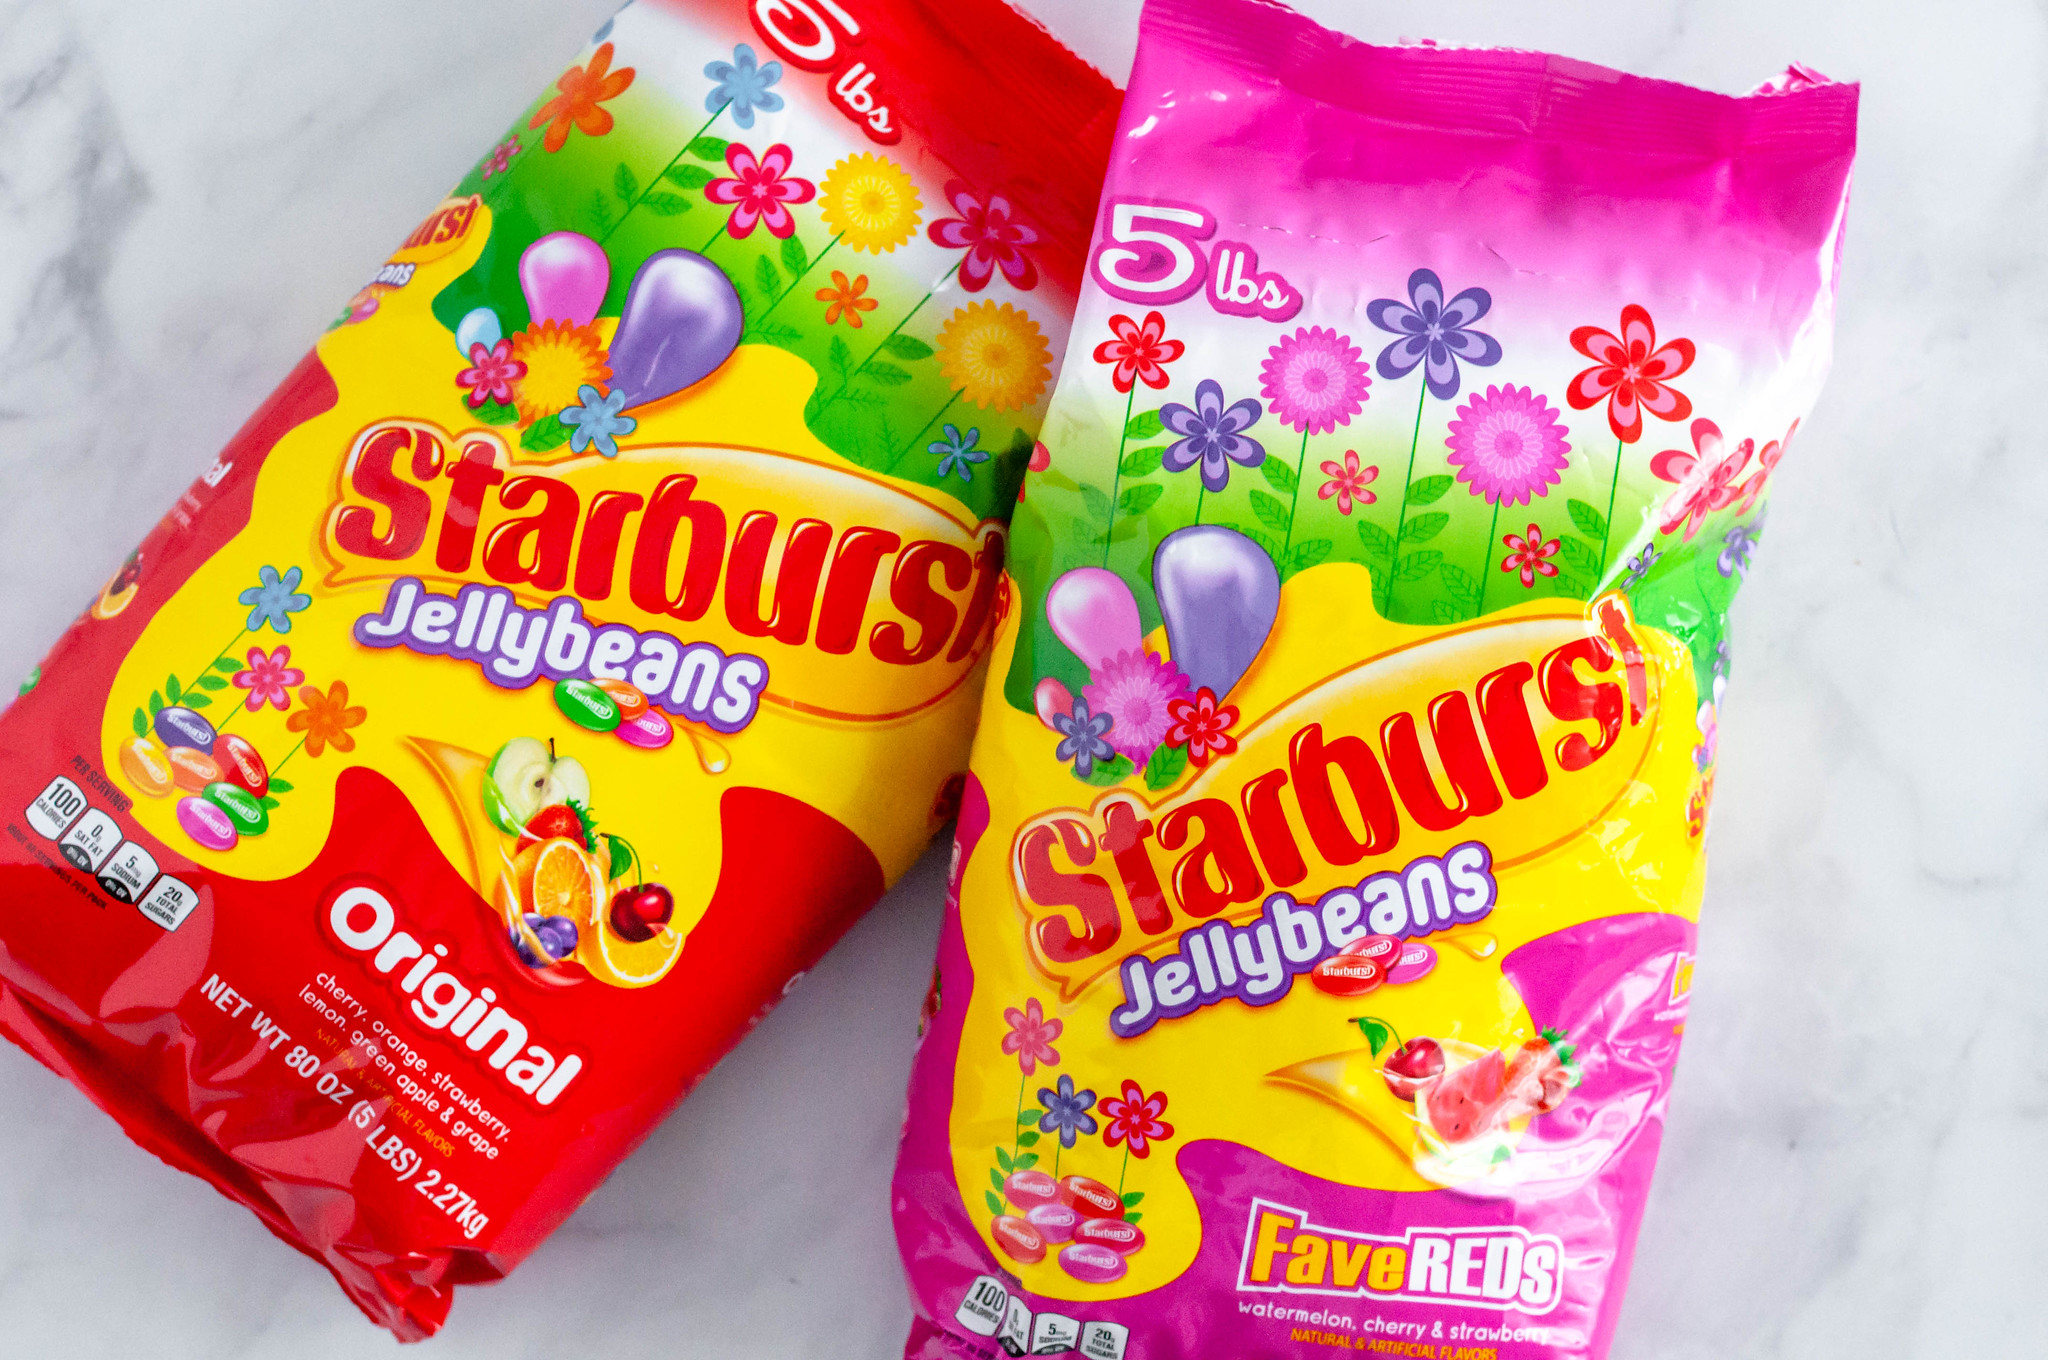 STARBURST® Jellybeans Popcorn Balls are the perfect treat for your Easter baskets. Grab a bag at a great value from Sams Club to make this fun dessert.